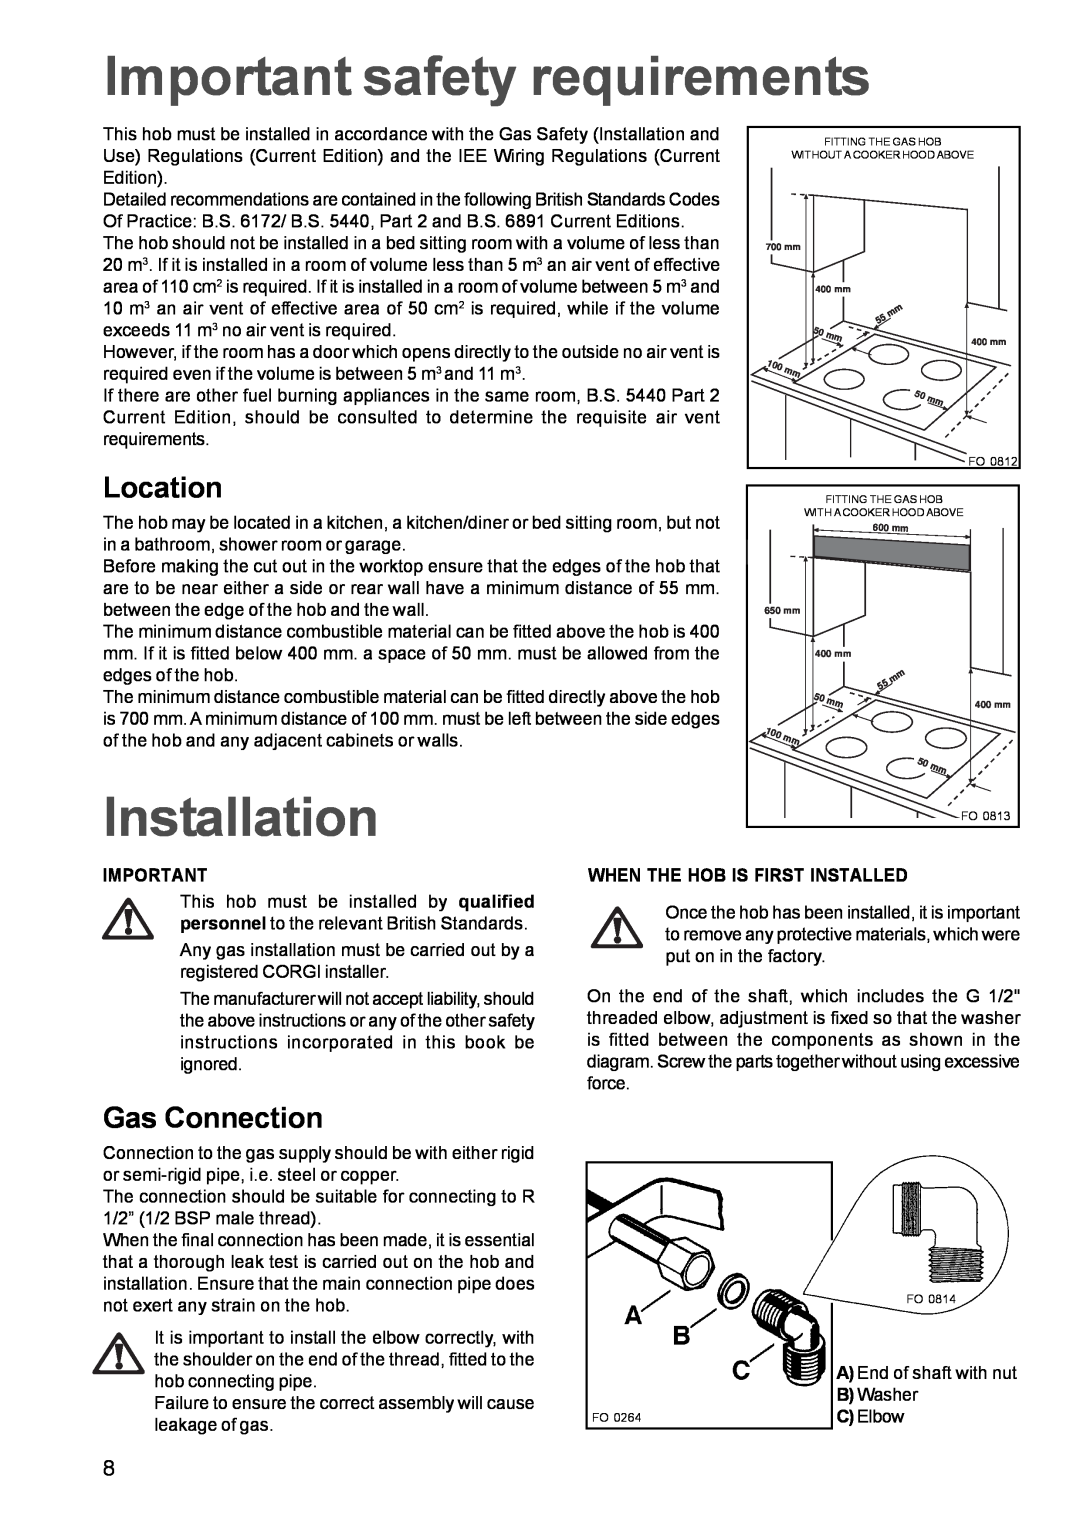 Electrolux EGG 690 manual Important safety requirements, Installation, Location, Gas Connection 